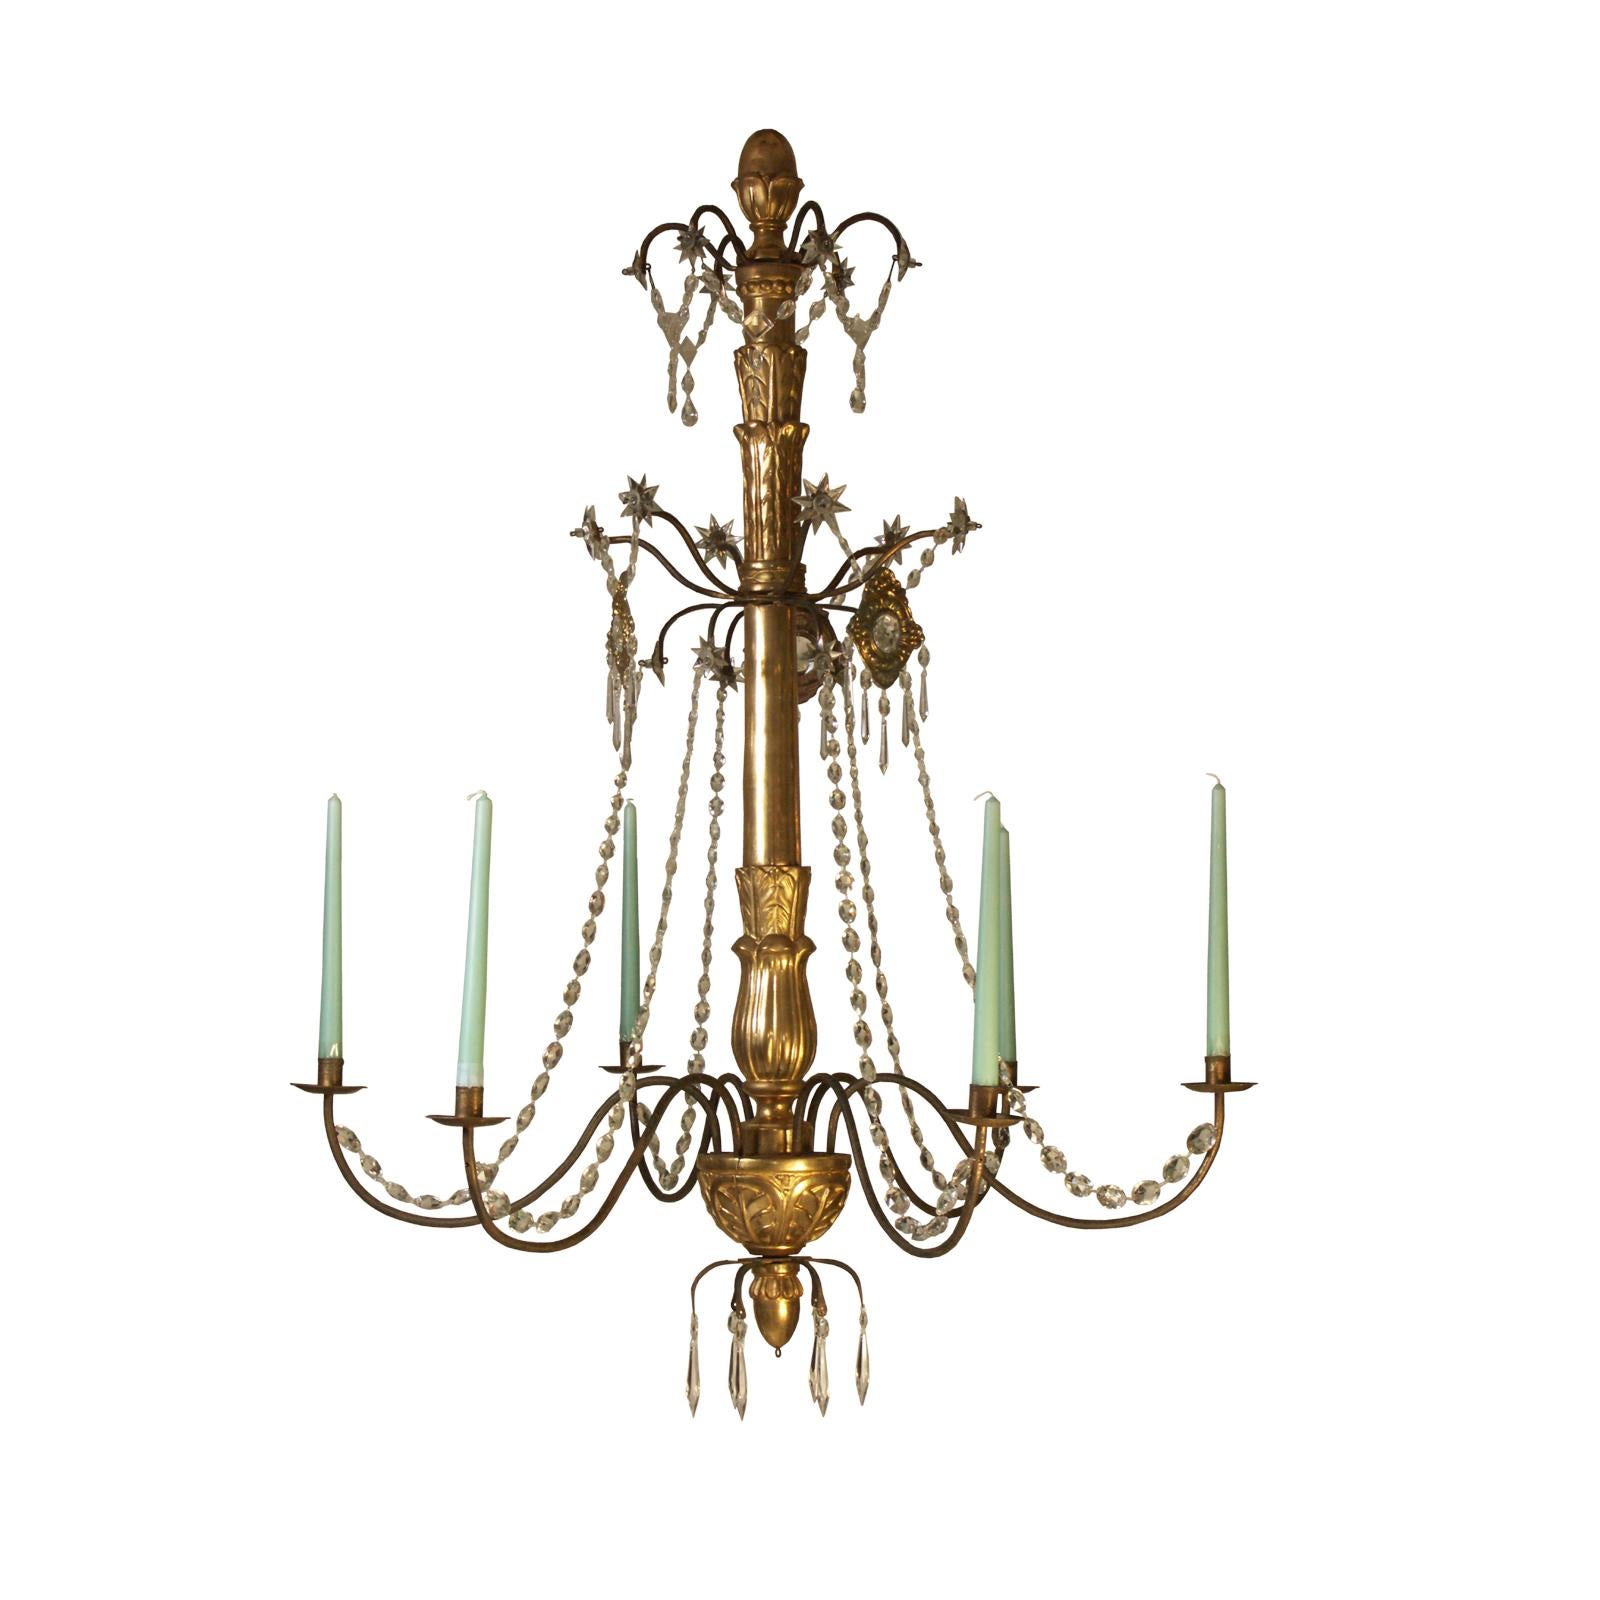 Original Biedermeier Chandelier 19th Century '1850' Carved and Gilded Six Flames For Sale 1